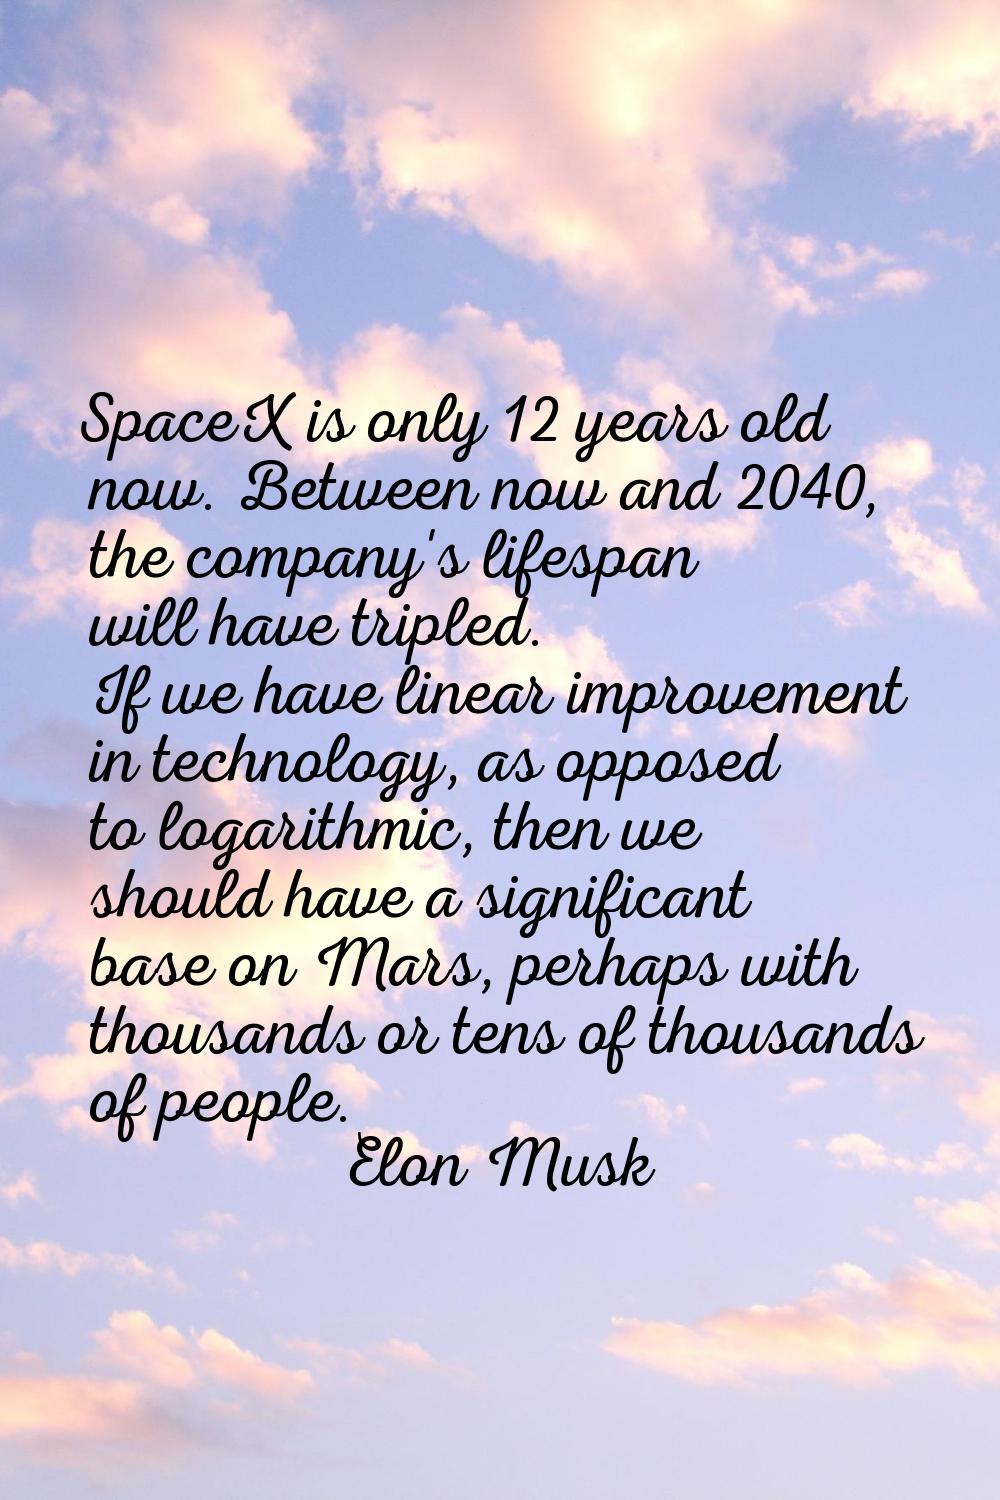 SpaceX is only 12 years old now. Between now and 2040, the company's lifespan will have tripled. If